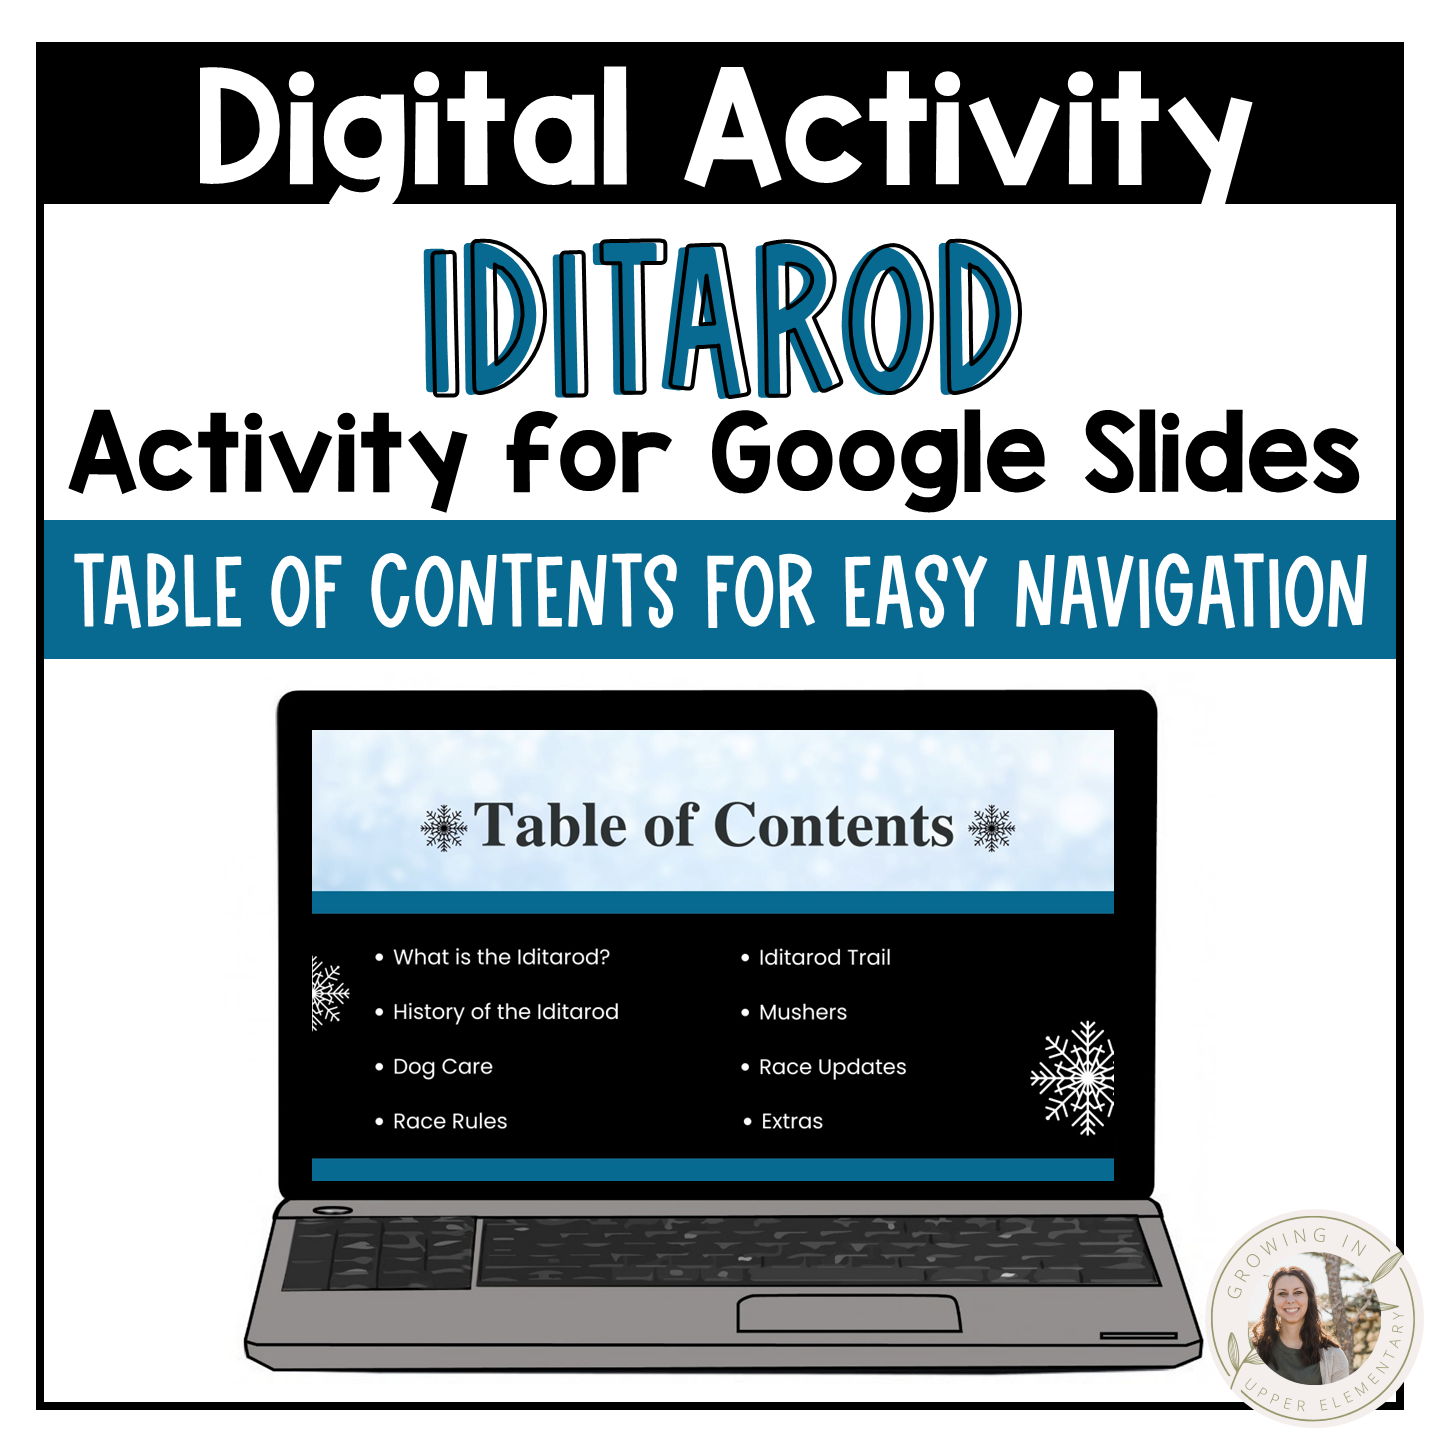 Iditarod Digital Activity for Google Slides All About Dog Sled Race